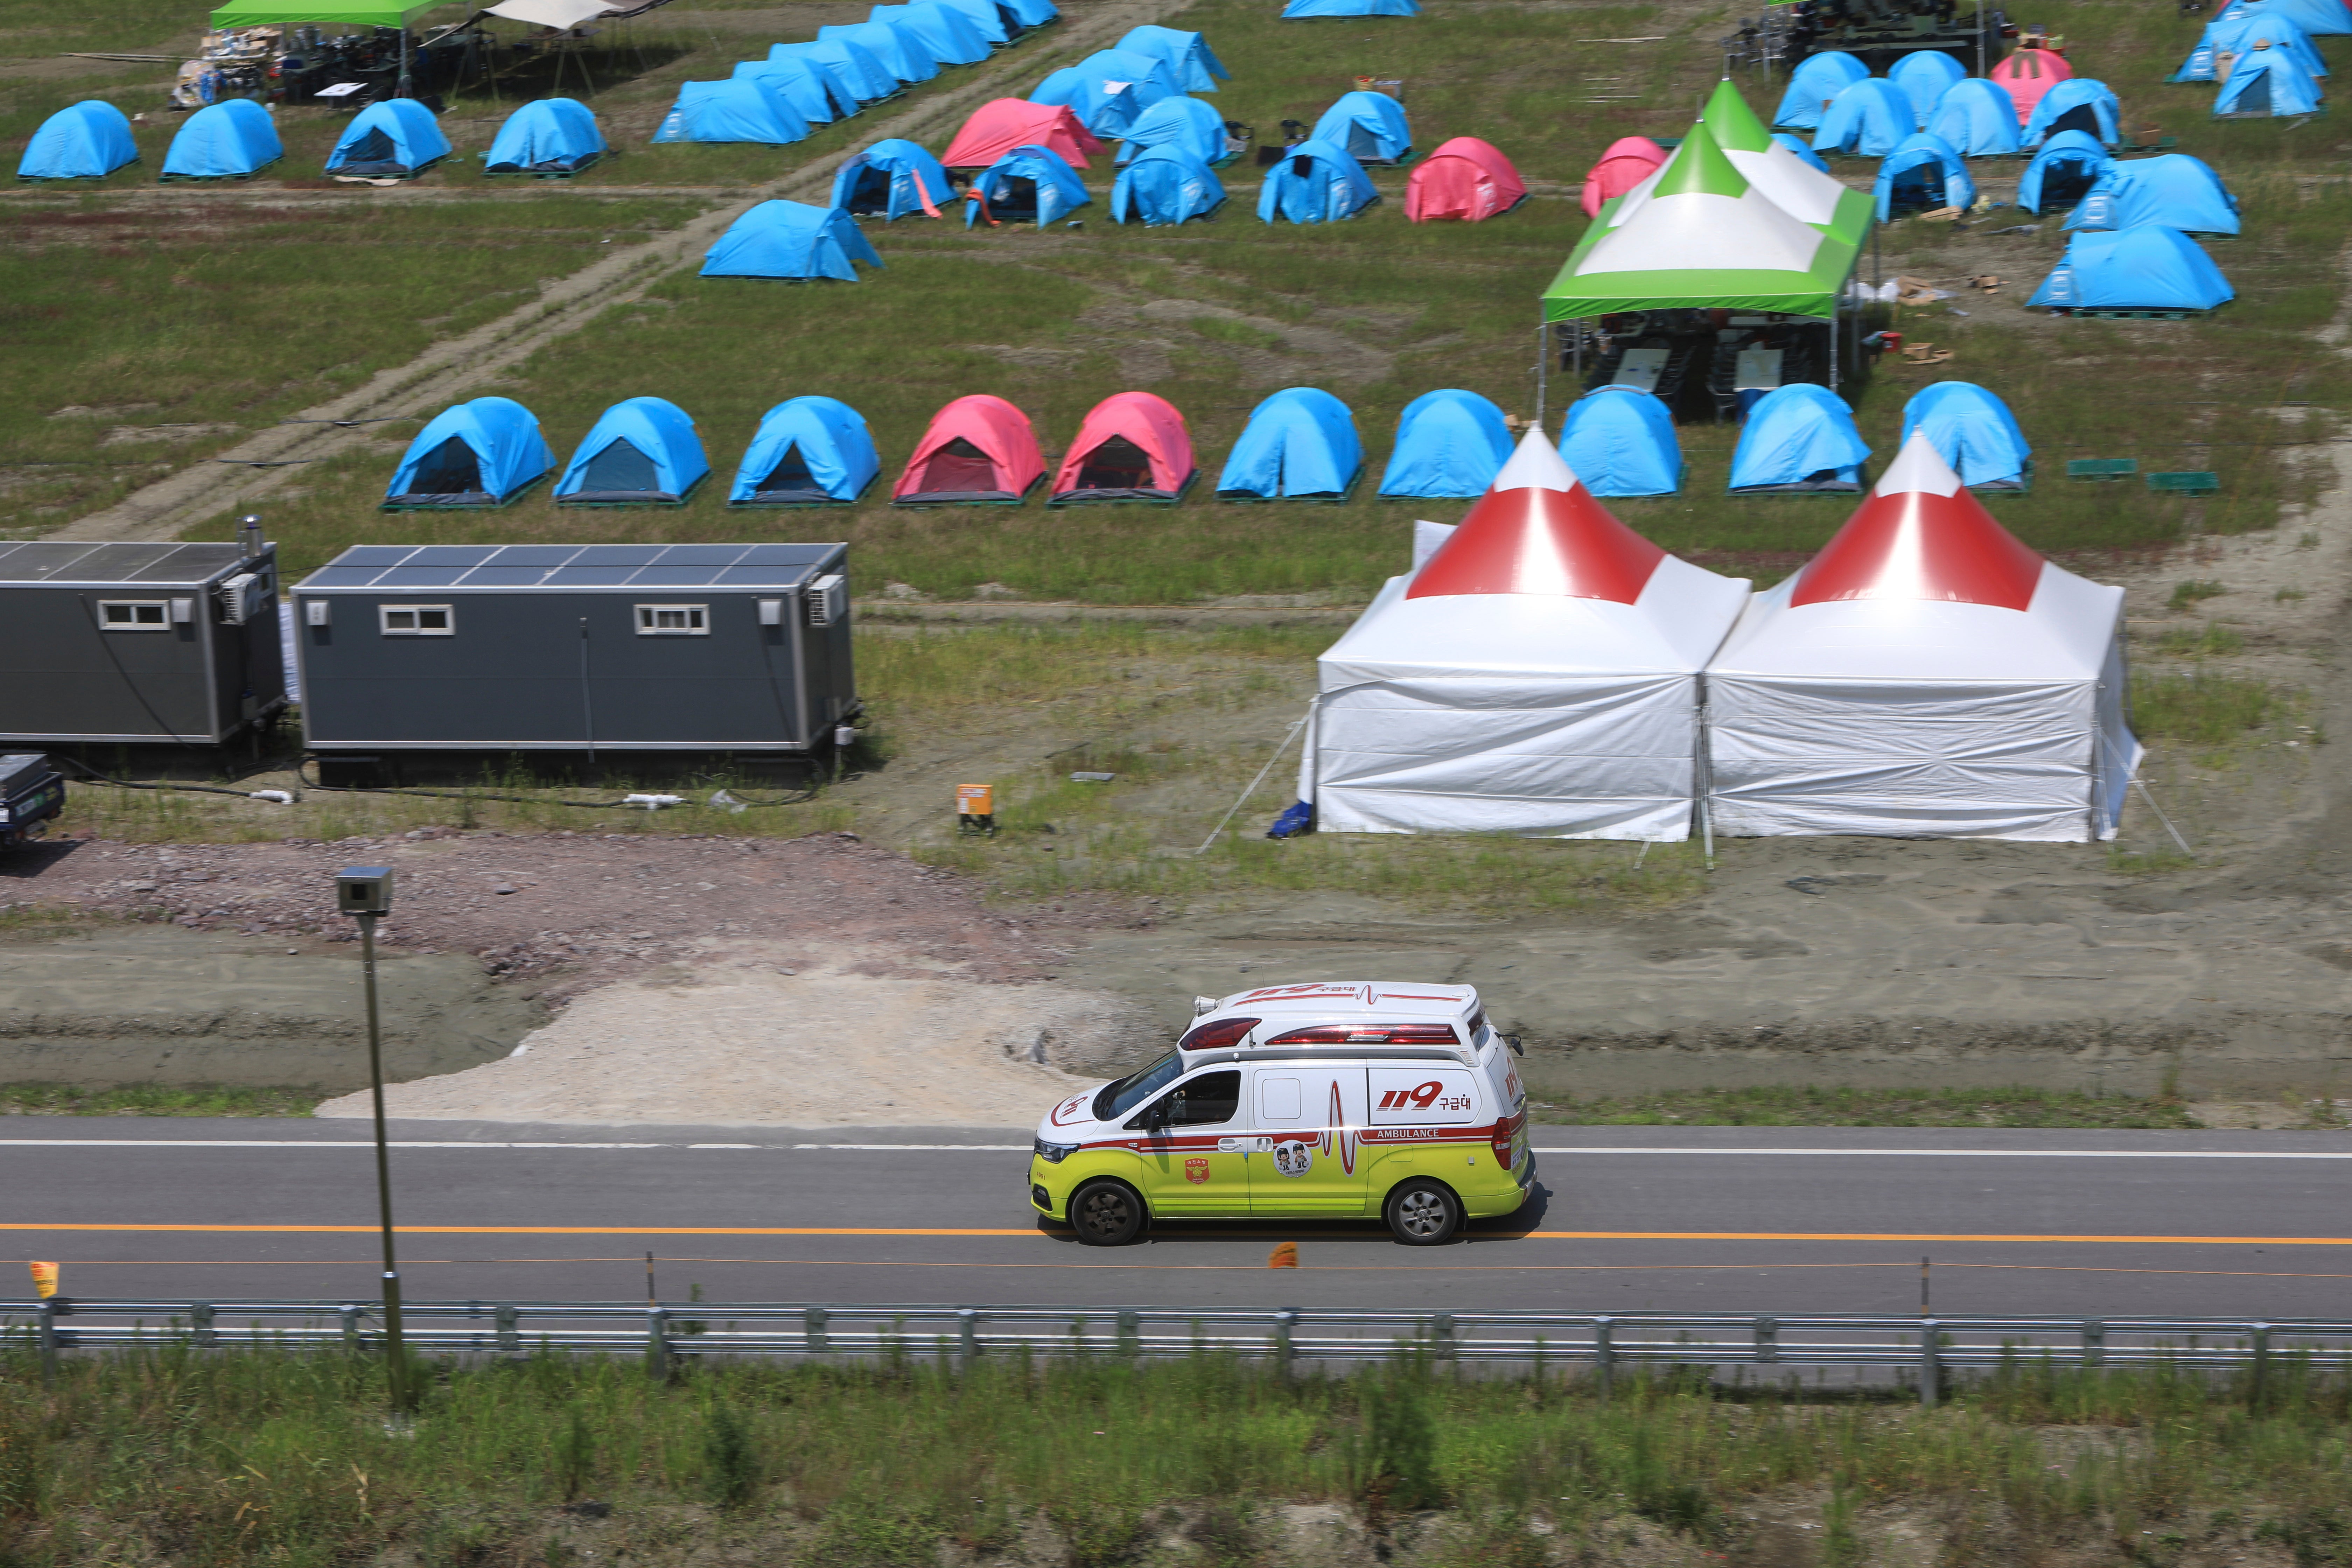 An ambulance arrives at the site in South Korea